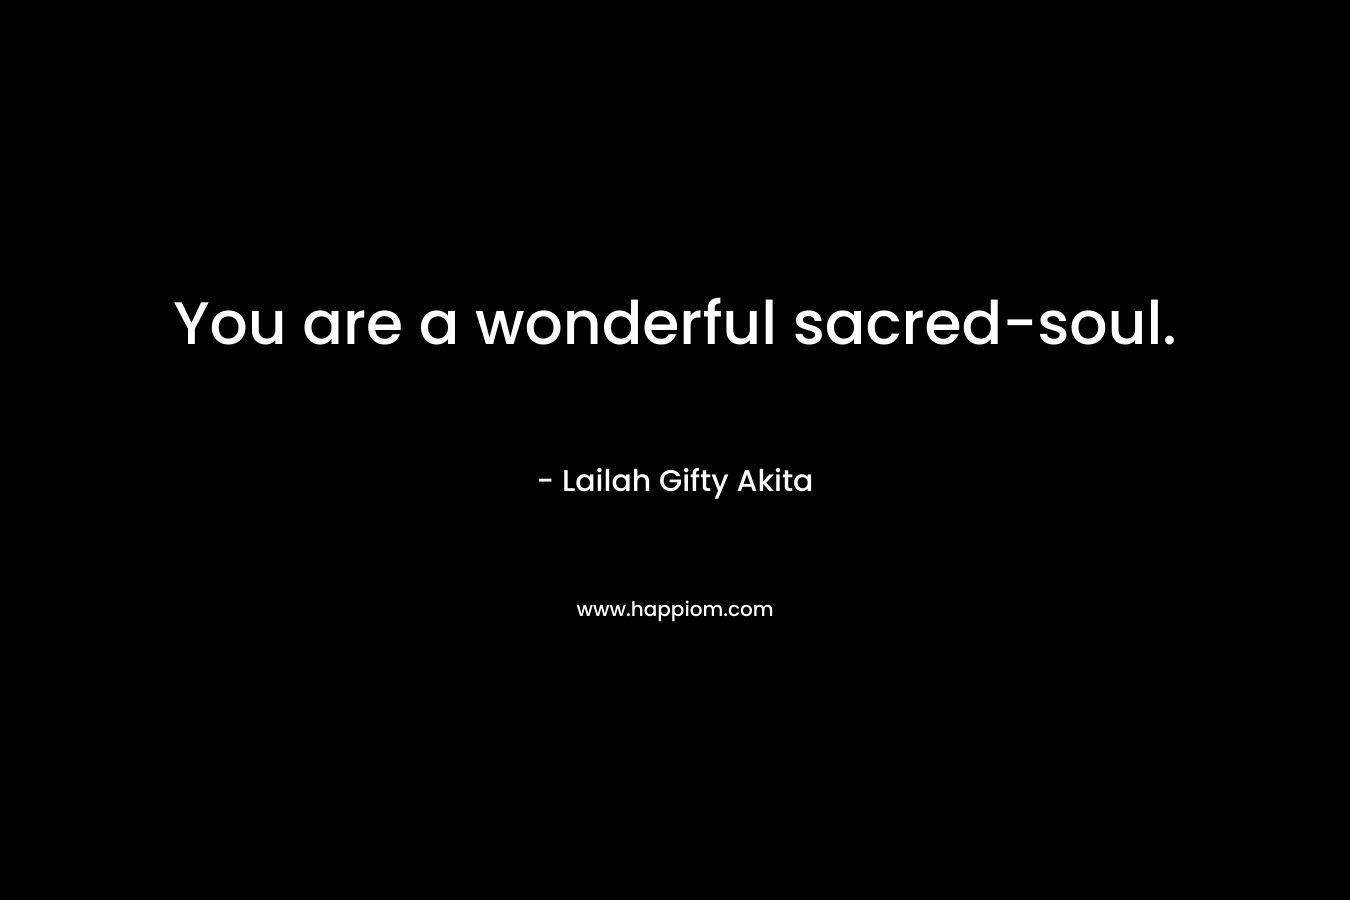 You are a wonderful sacred-soul.